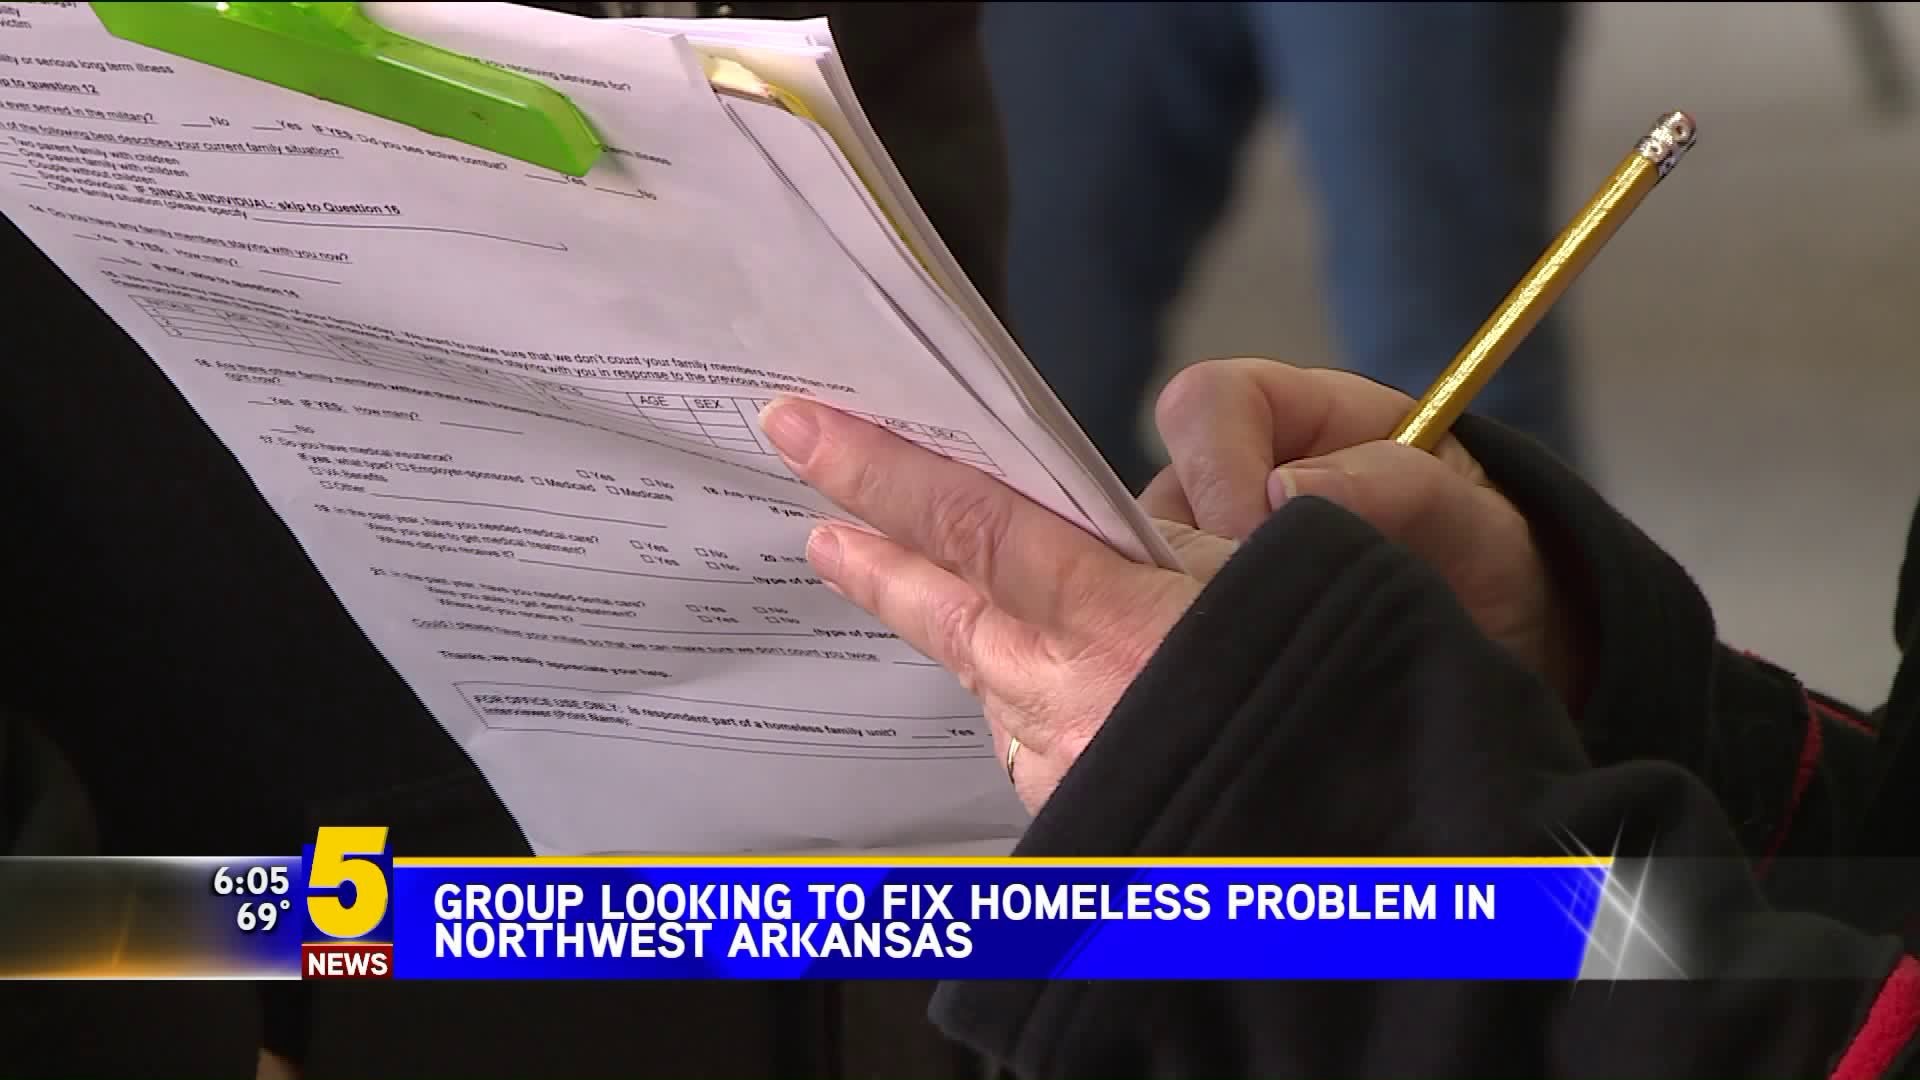 Group Looking To Fix Homeless Problem In Northwest Arkansas